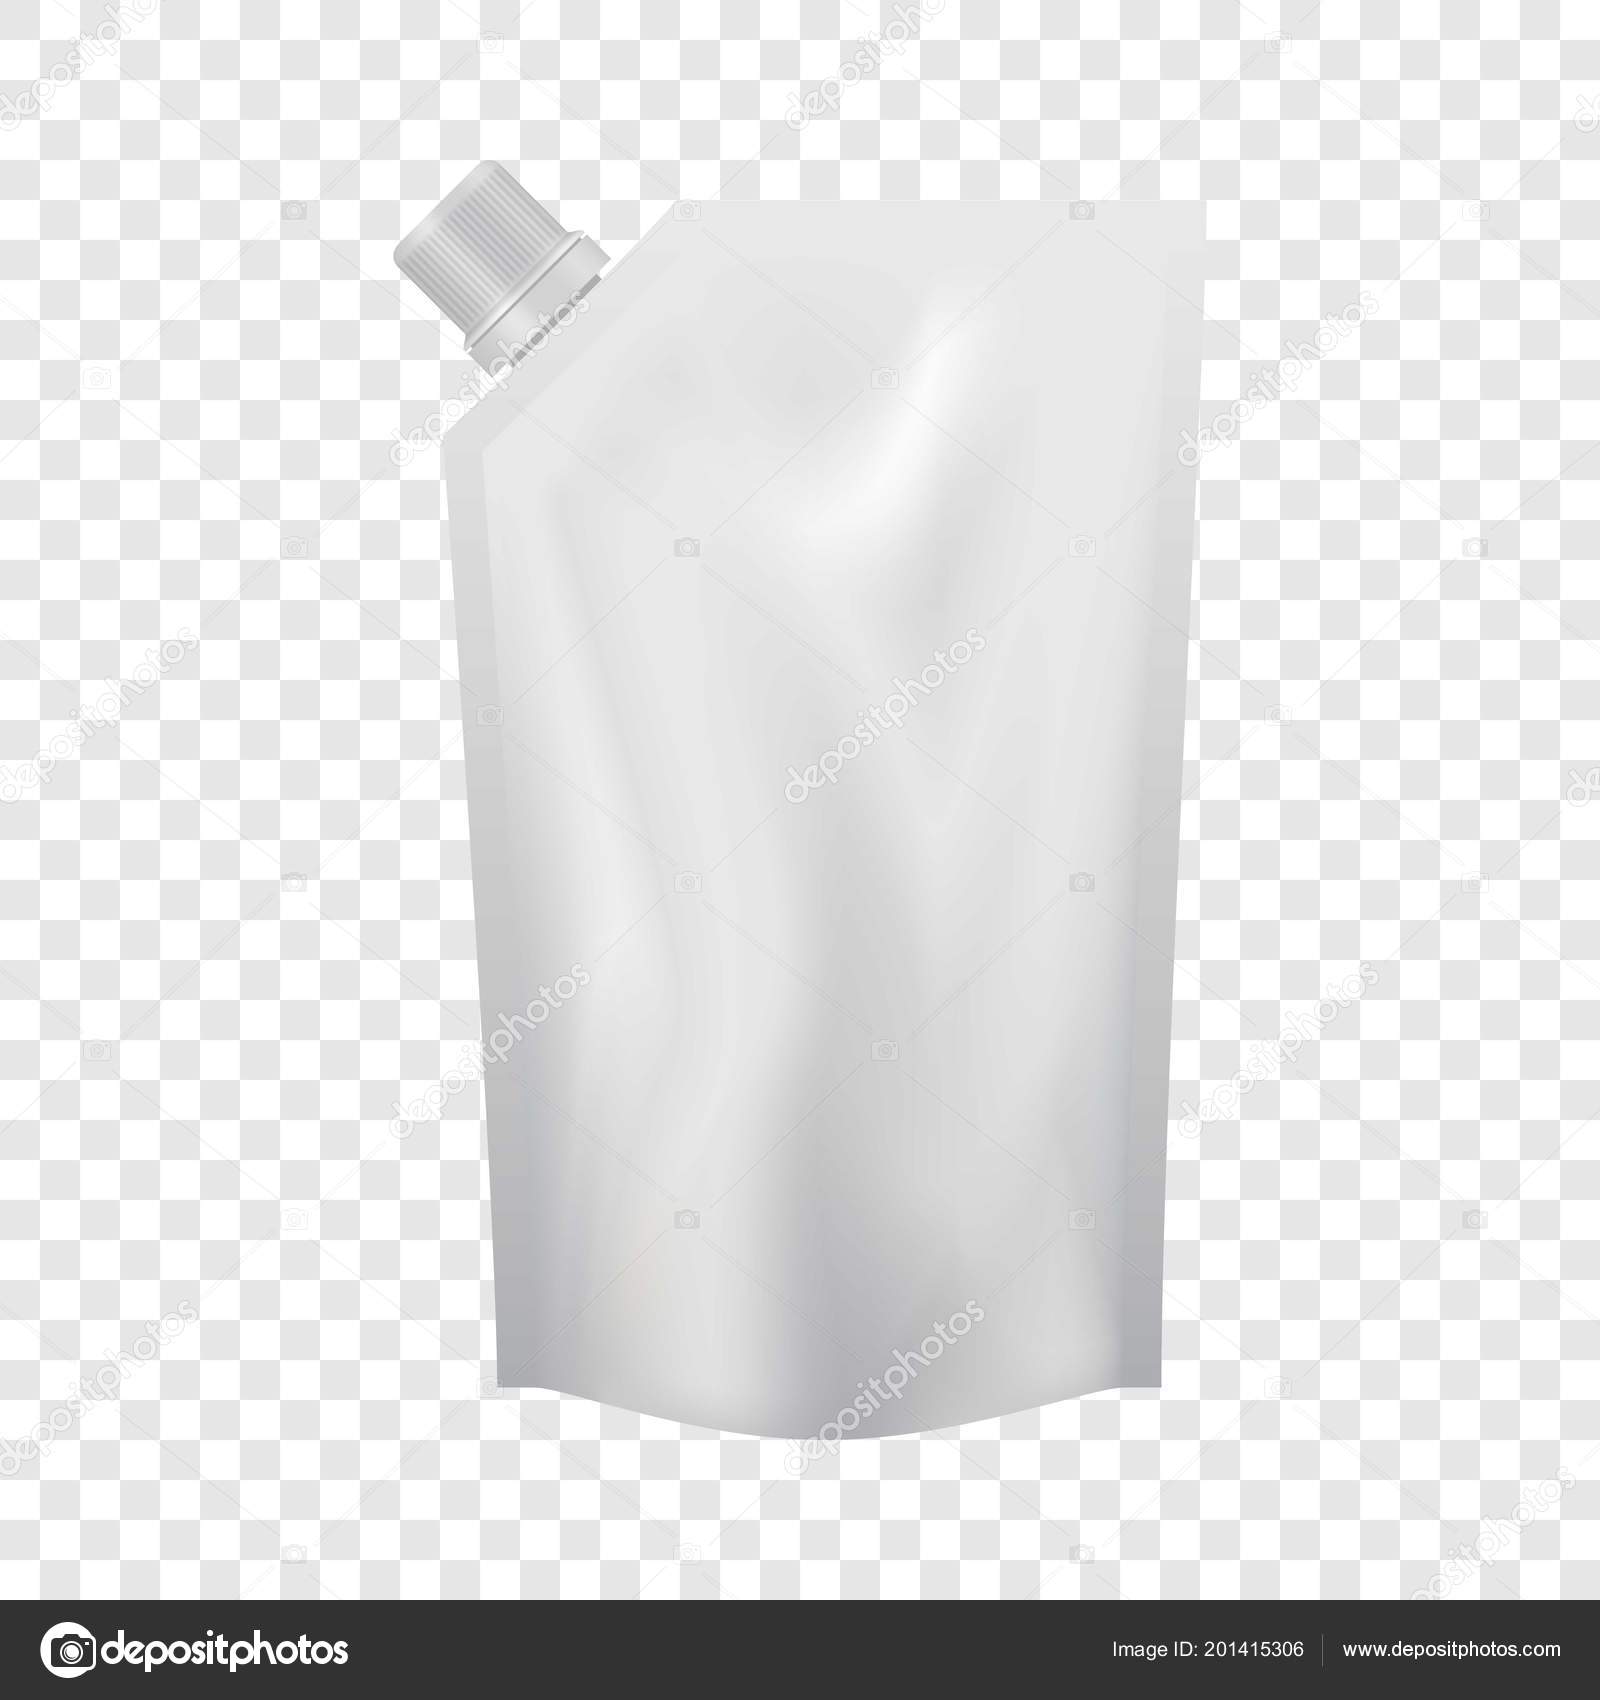 Download Plastic Pouch With Batcher Mockup Realistic Style Vector Image By C Ylivdesign Vector Stock 201415306